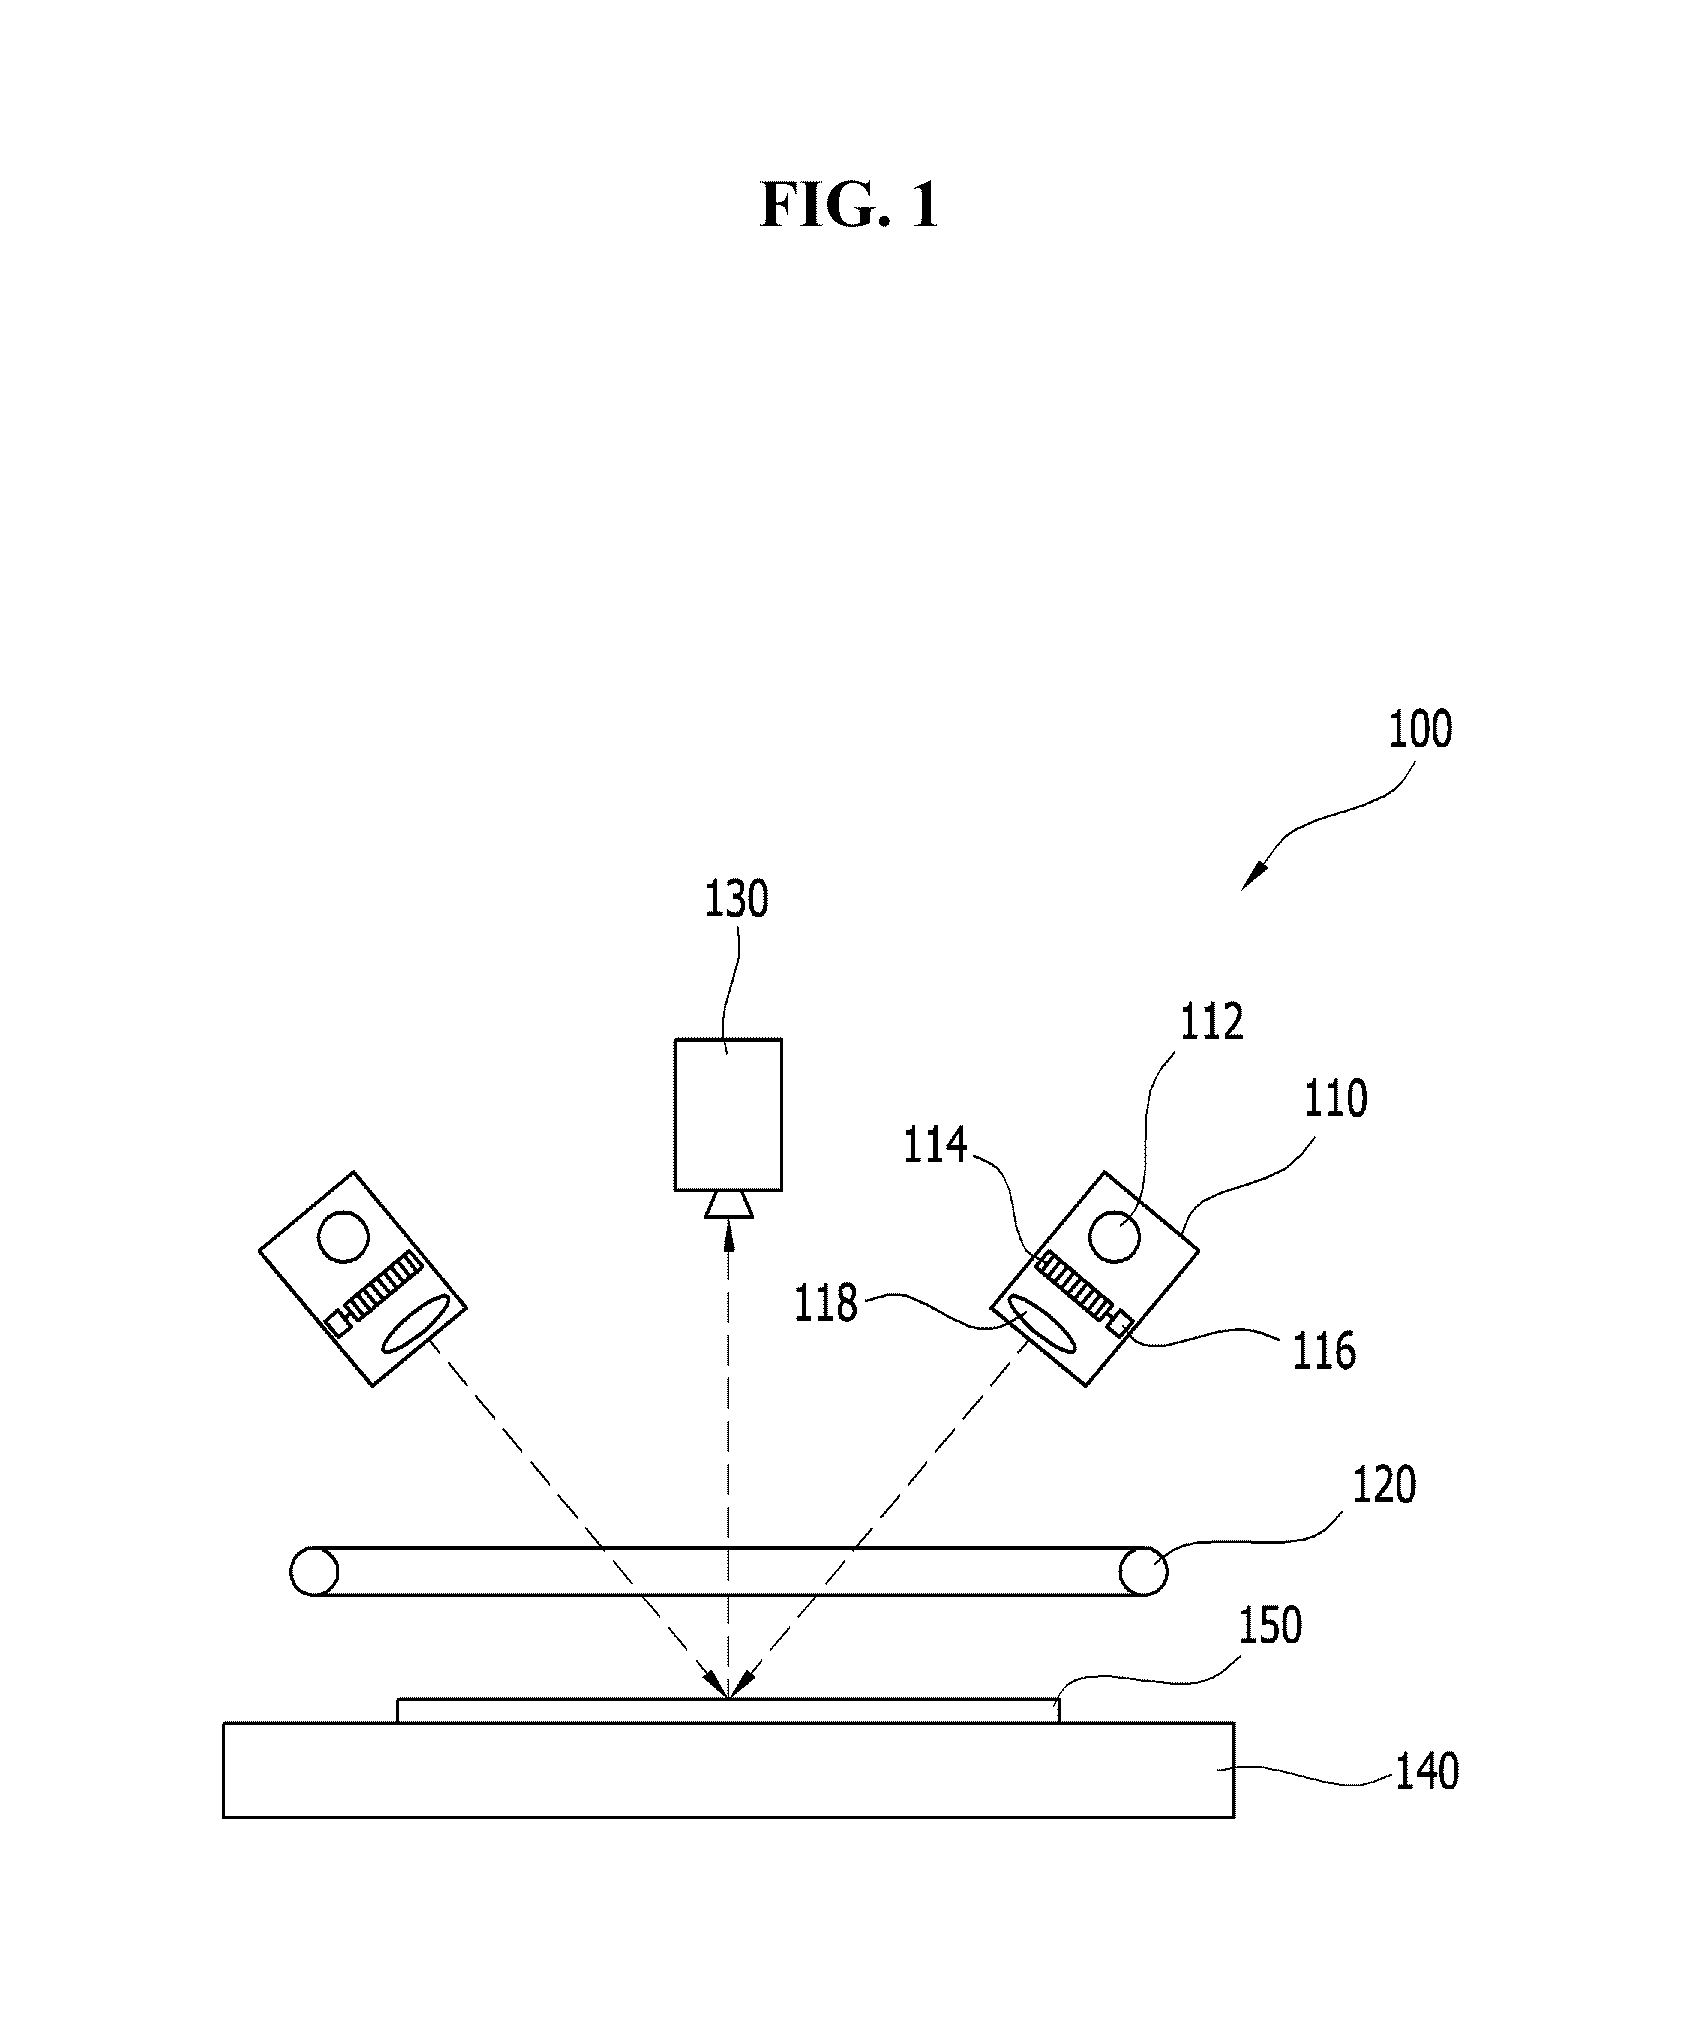 Method of checking an inspection apparatus and method of establishing a measurement variable of the inspection apparatus